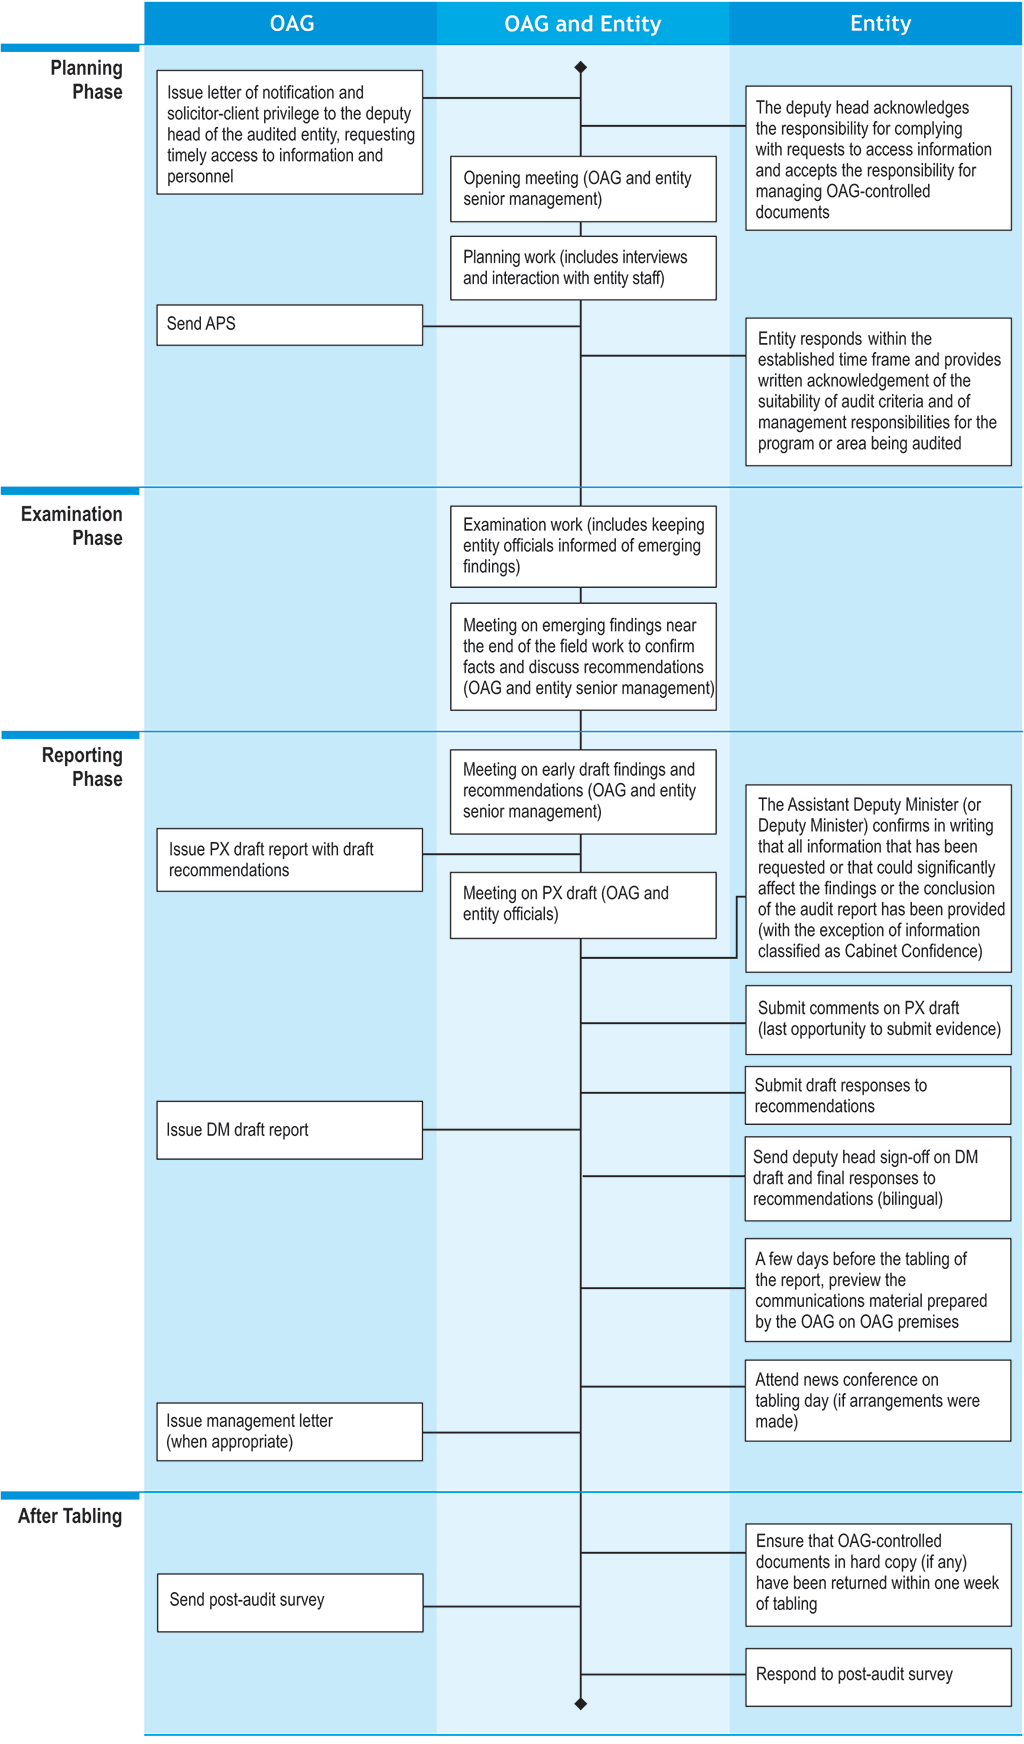 Flow chart showing the planning, examination, reporting, and post-tabling phases of a performance audit